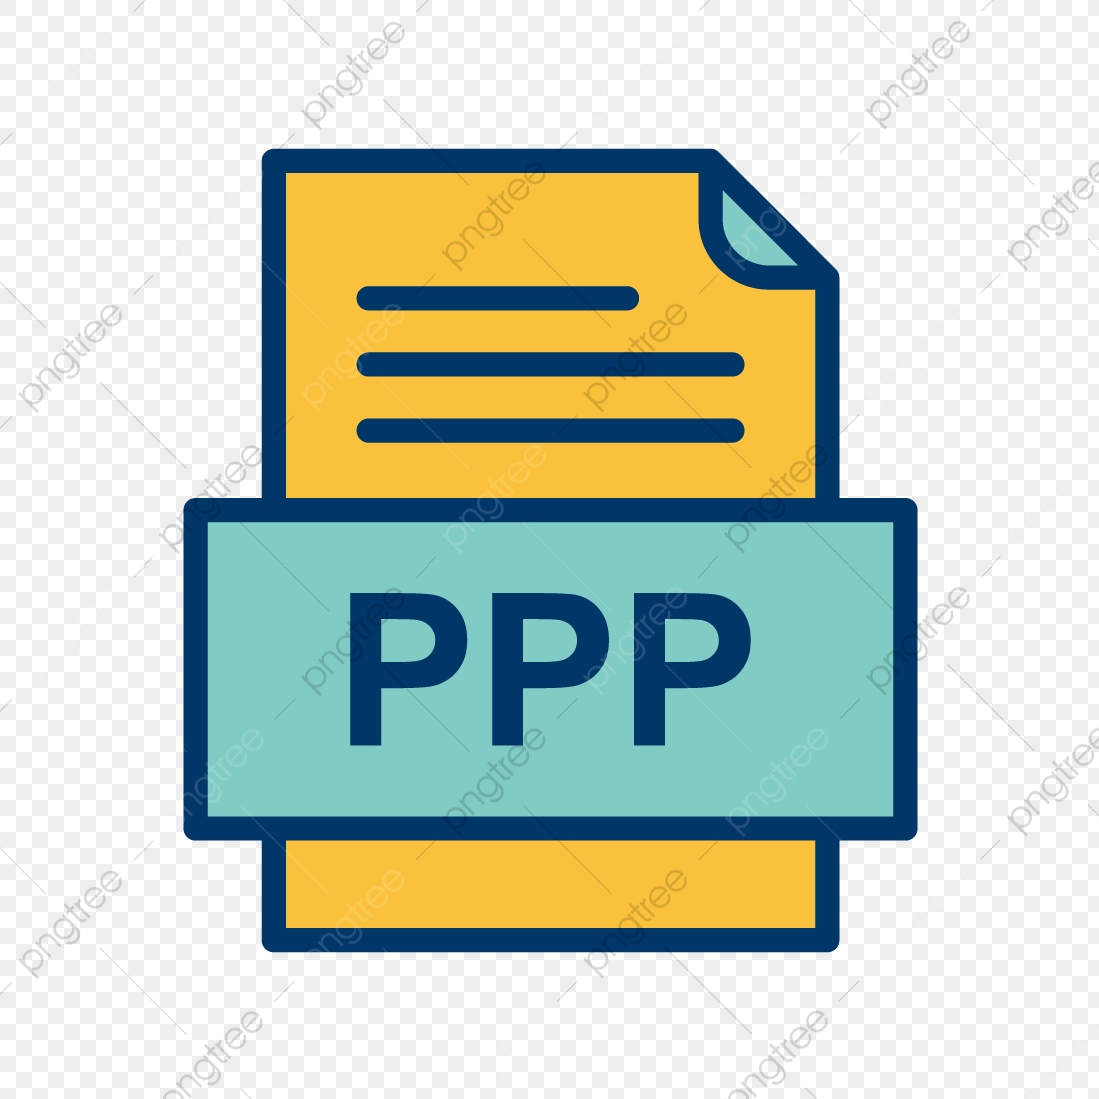 Ppp File Document Icon, Ppp, Document, File PNG and Vector.